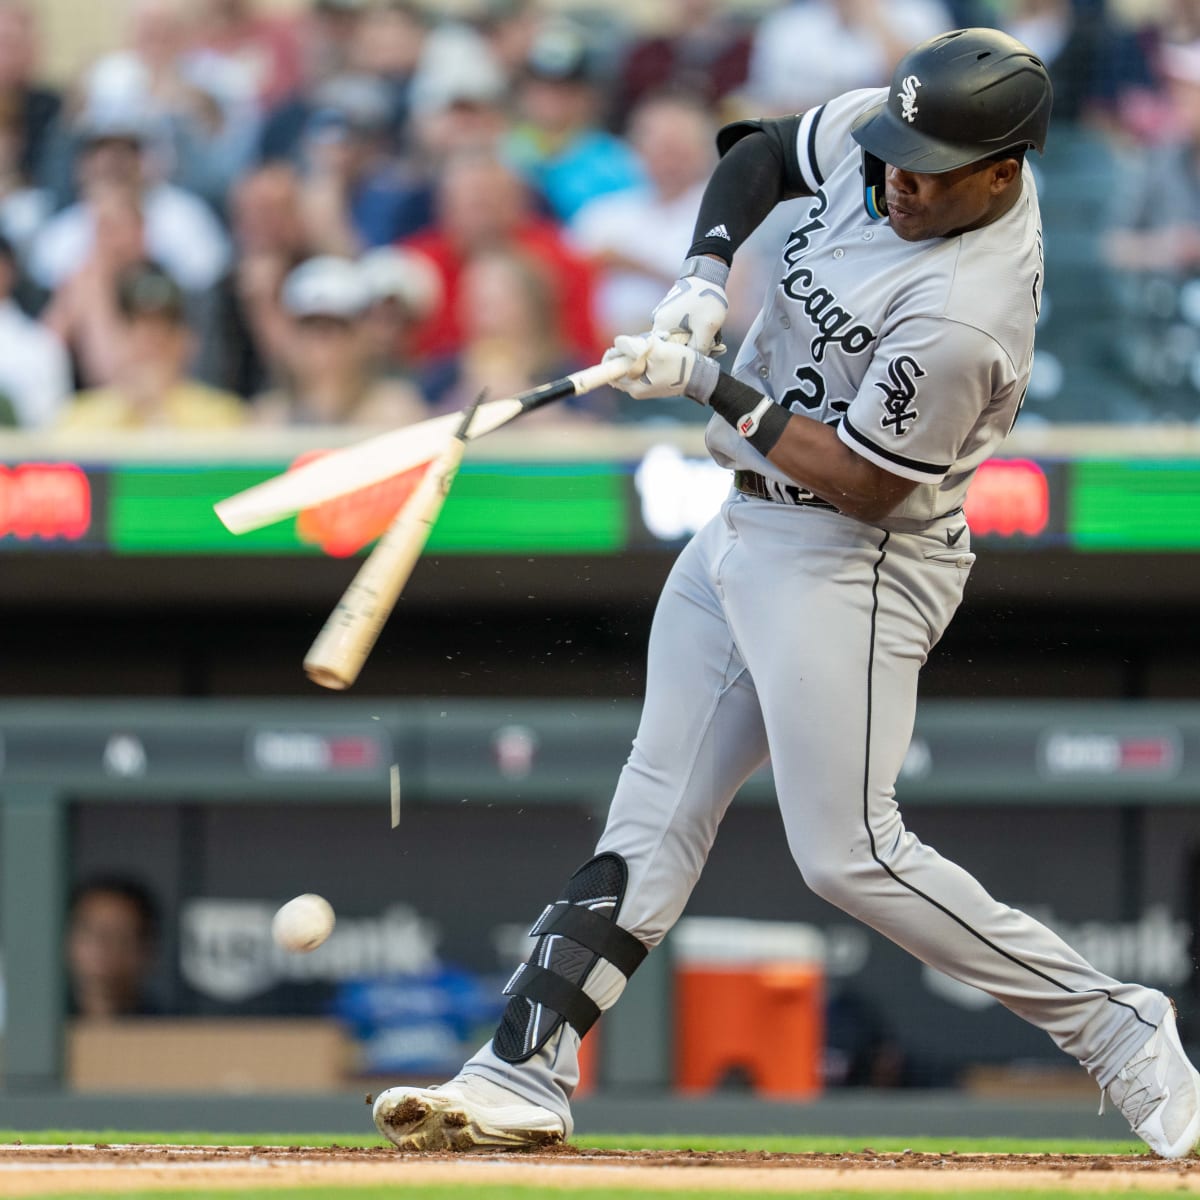 White Sox Send 7 Players to Minor League Camp in Latest Roster